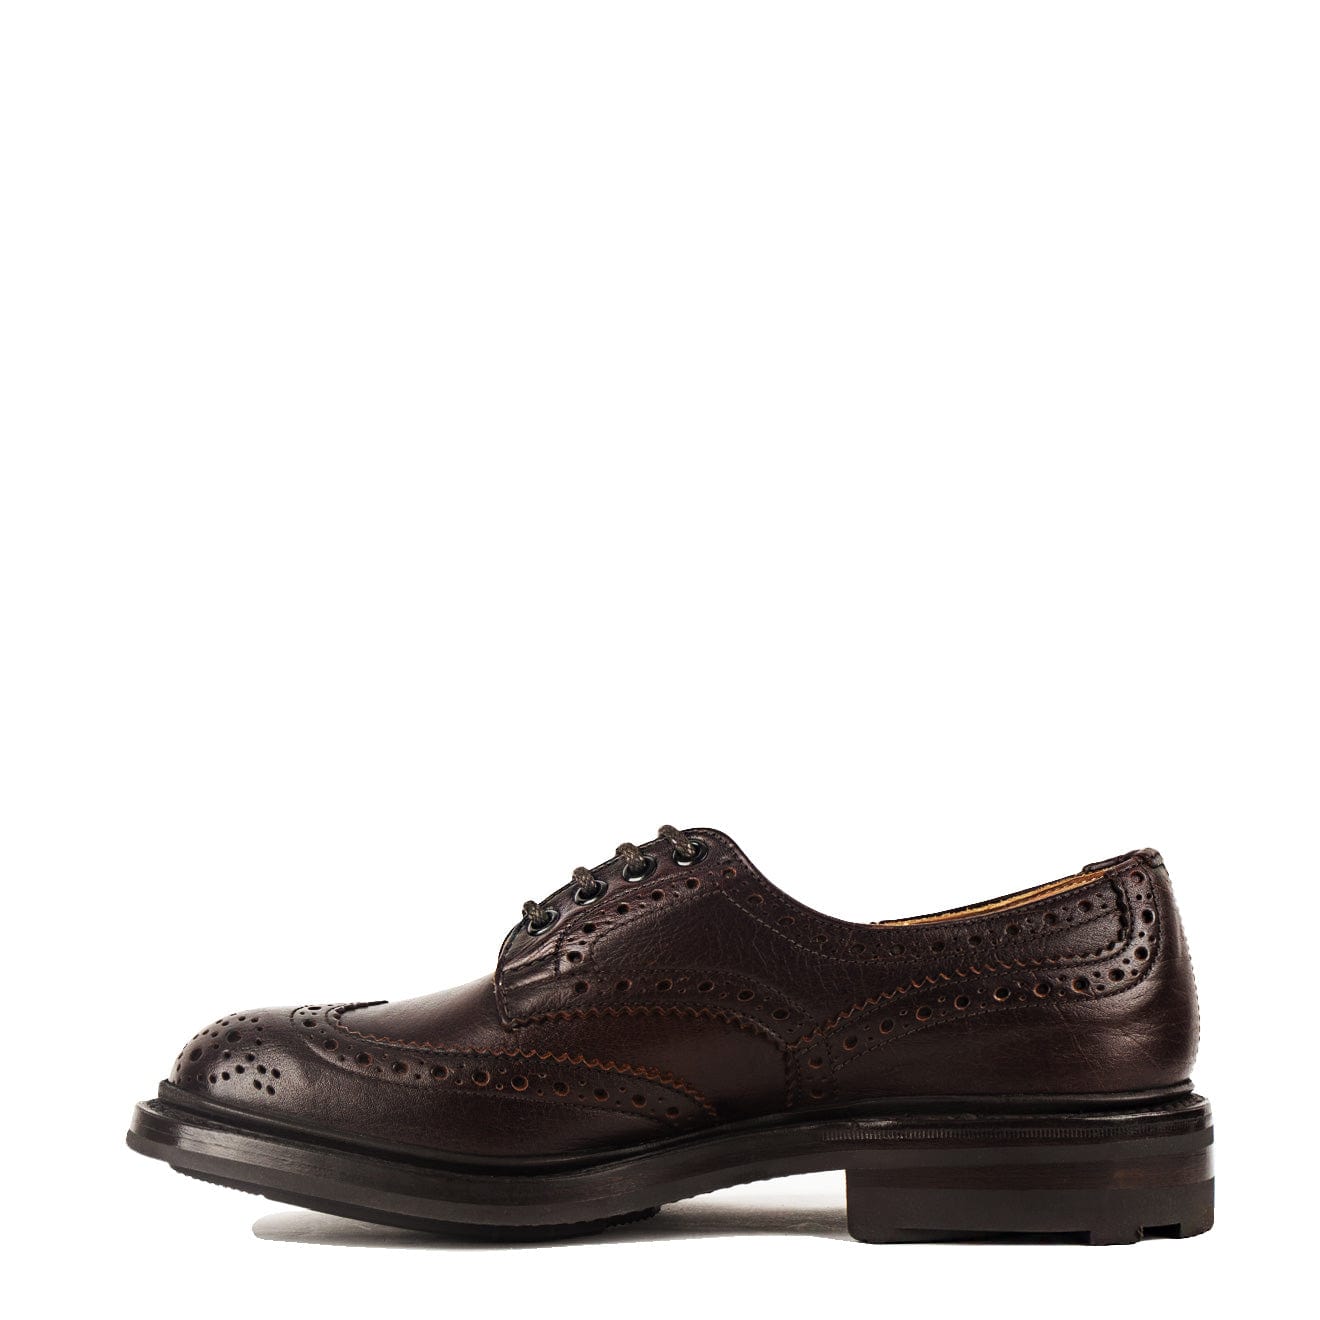 Trickers Bourton Country Shoe Snuff Kudu | The Sporting Lodge